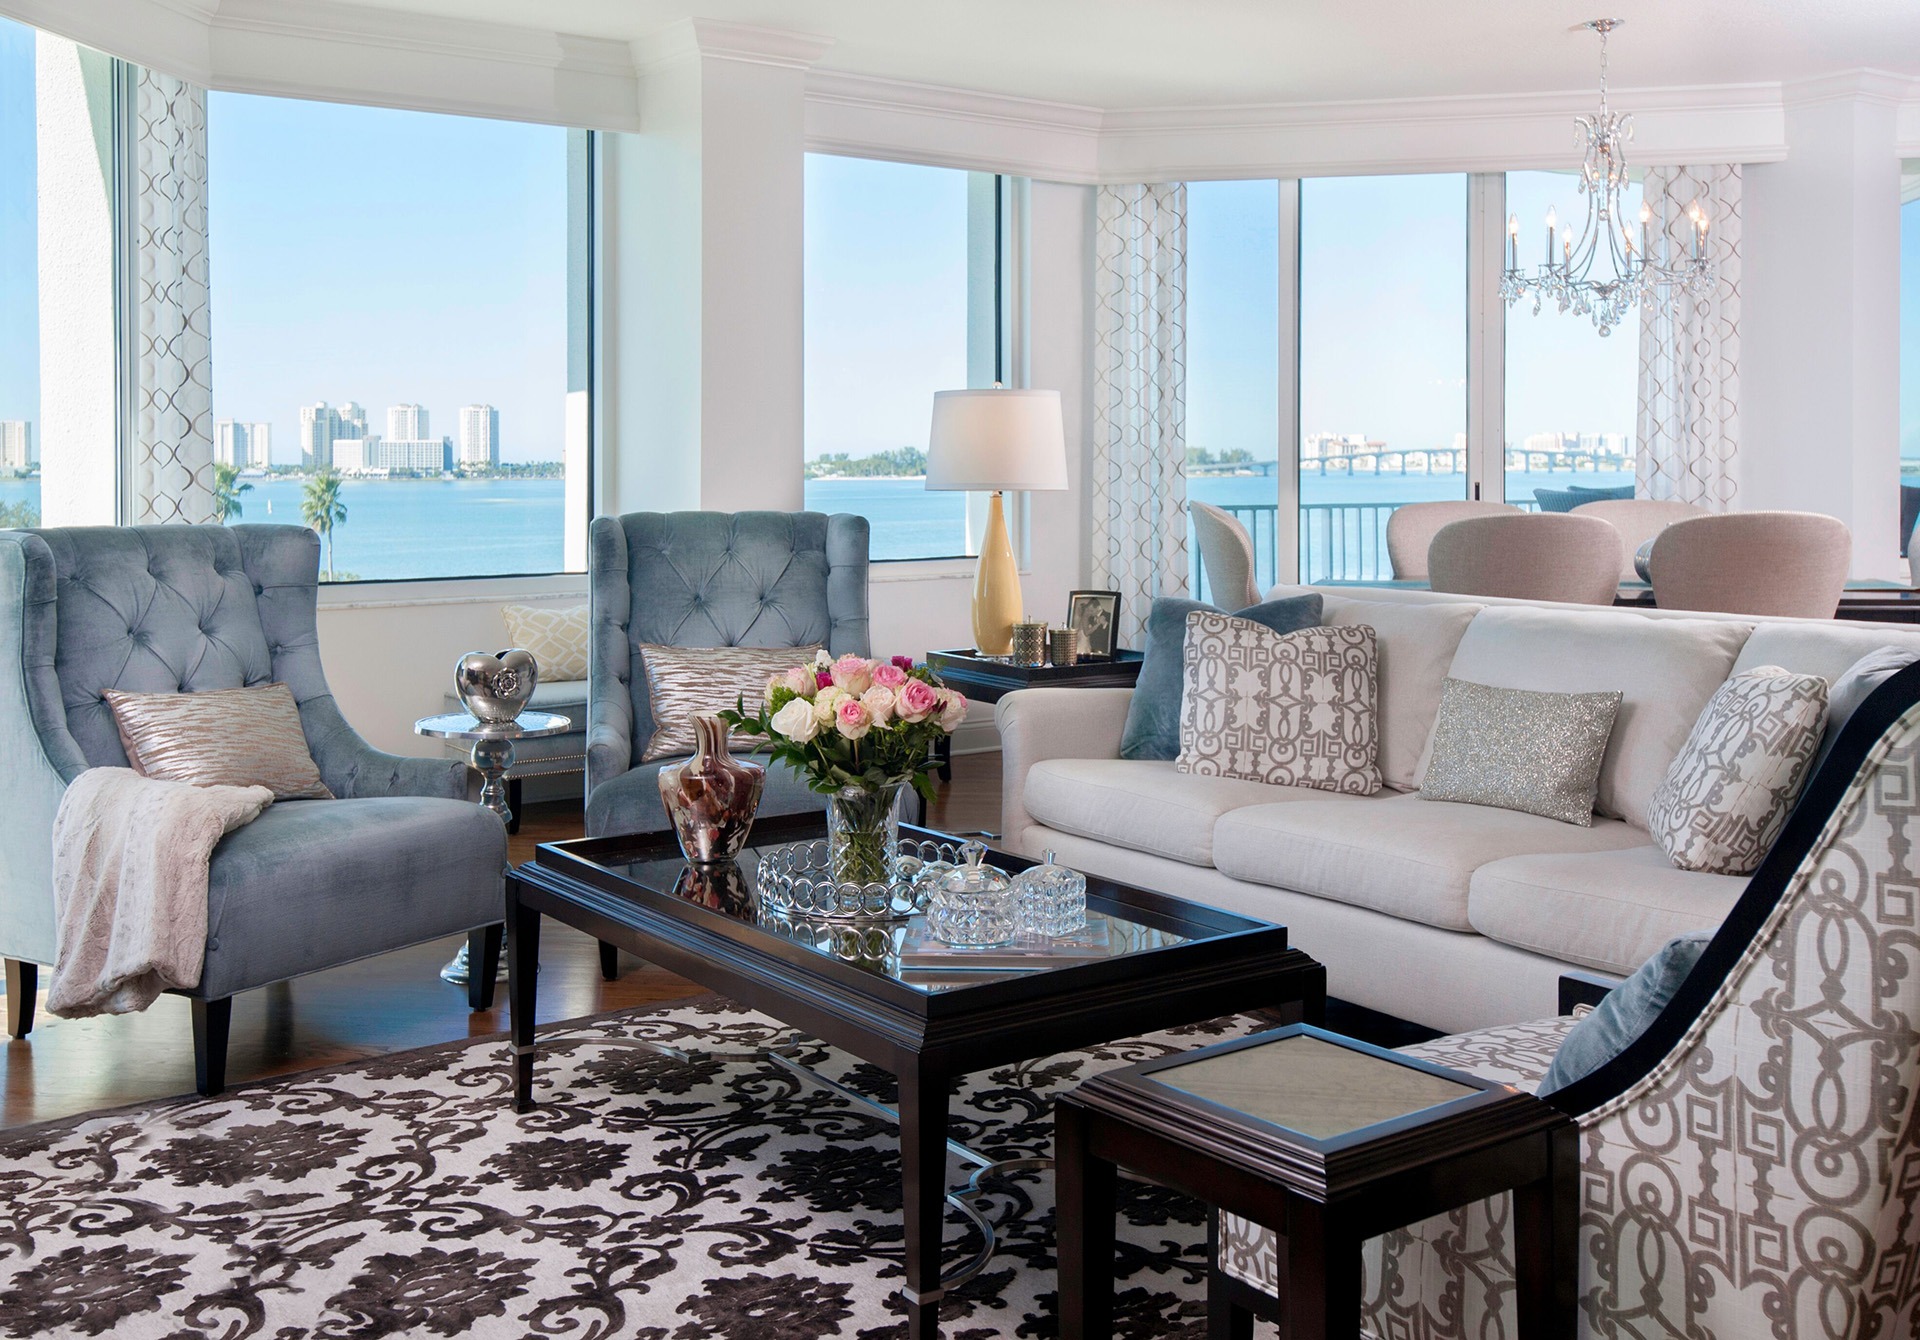 How to Decorate a Room with an Amazing View